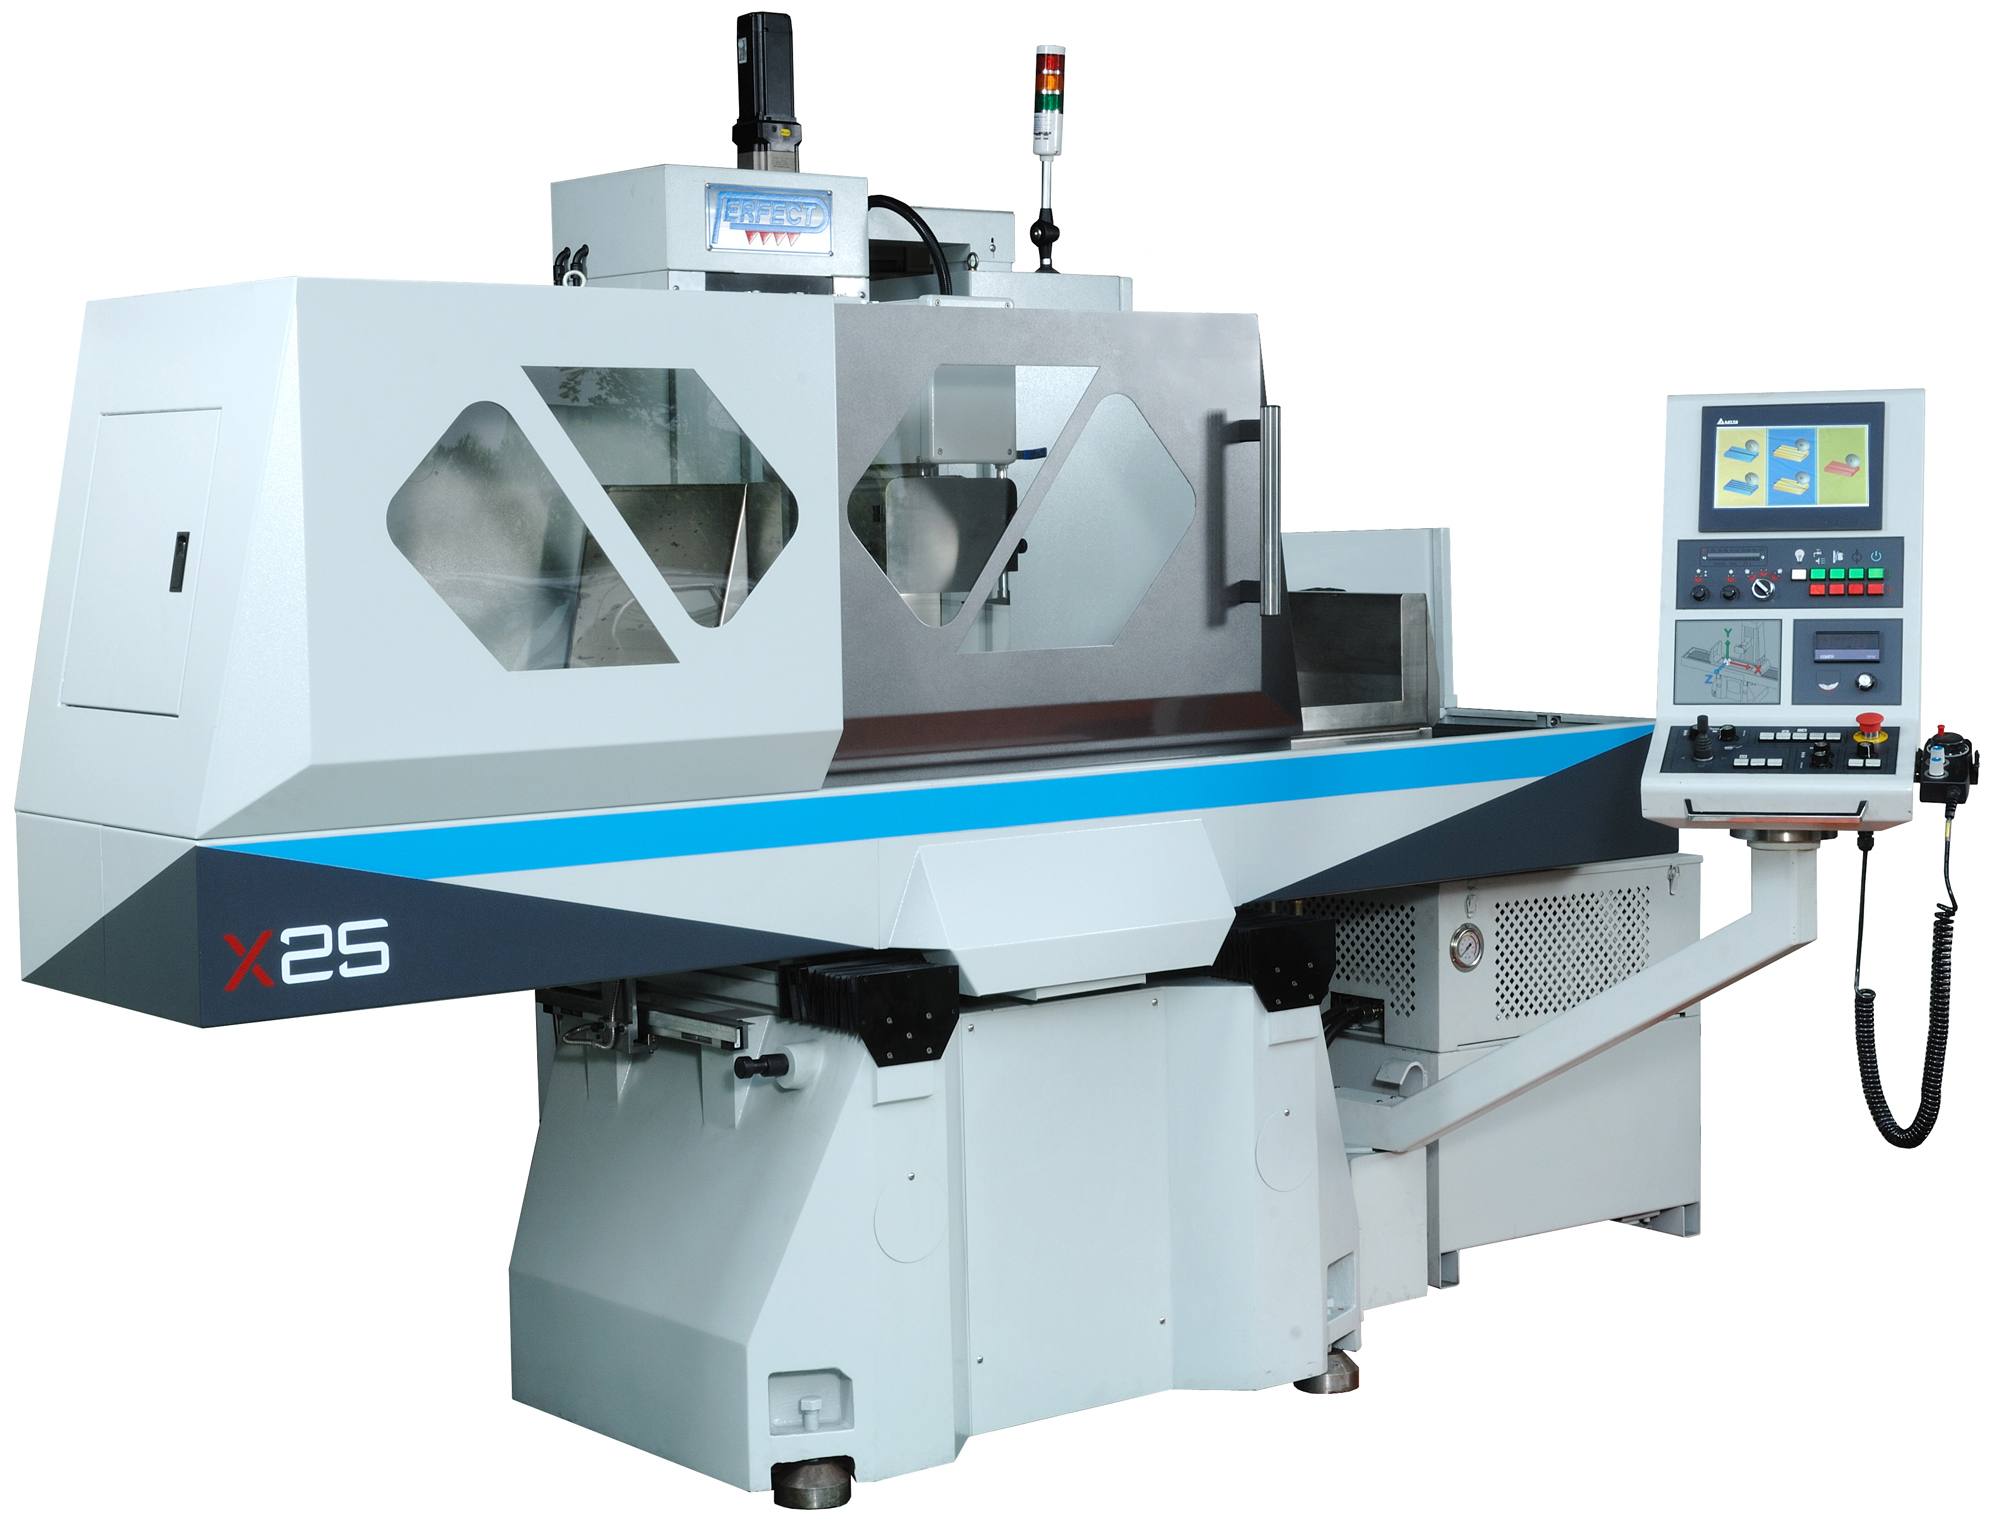 Perfect X25 plc cnc surface grinders from RK International 